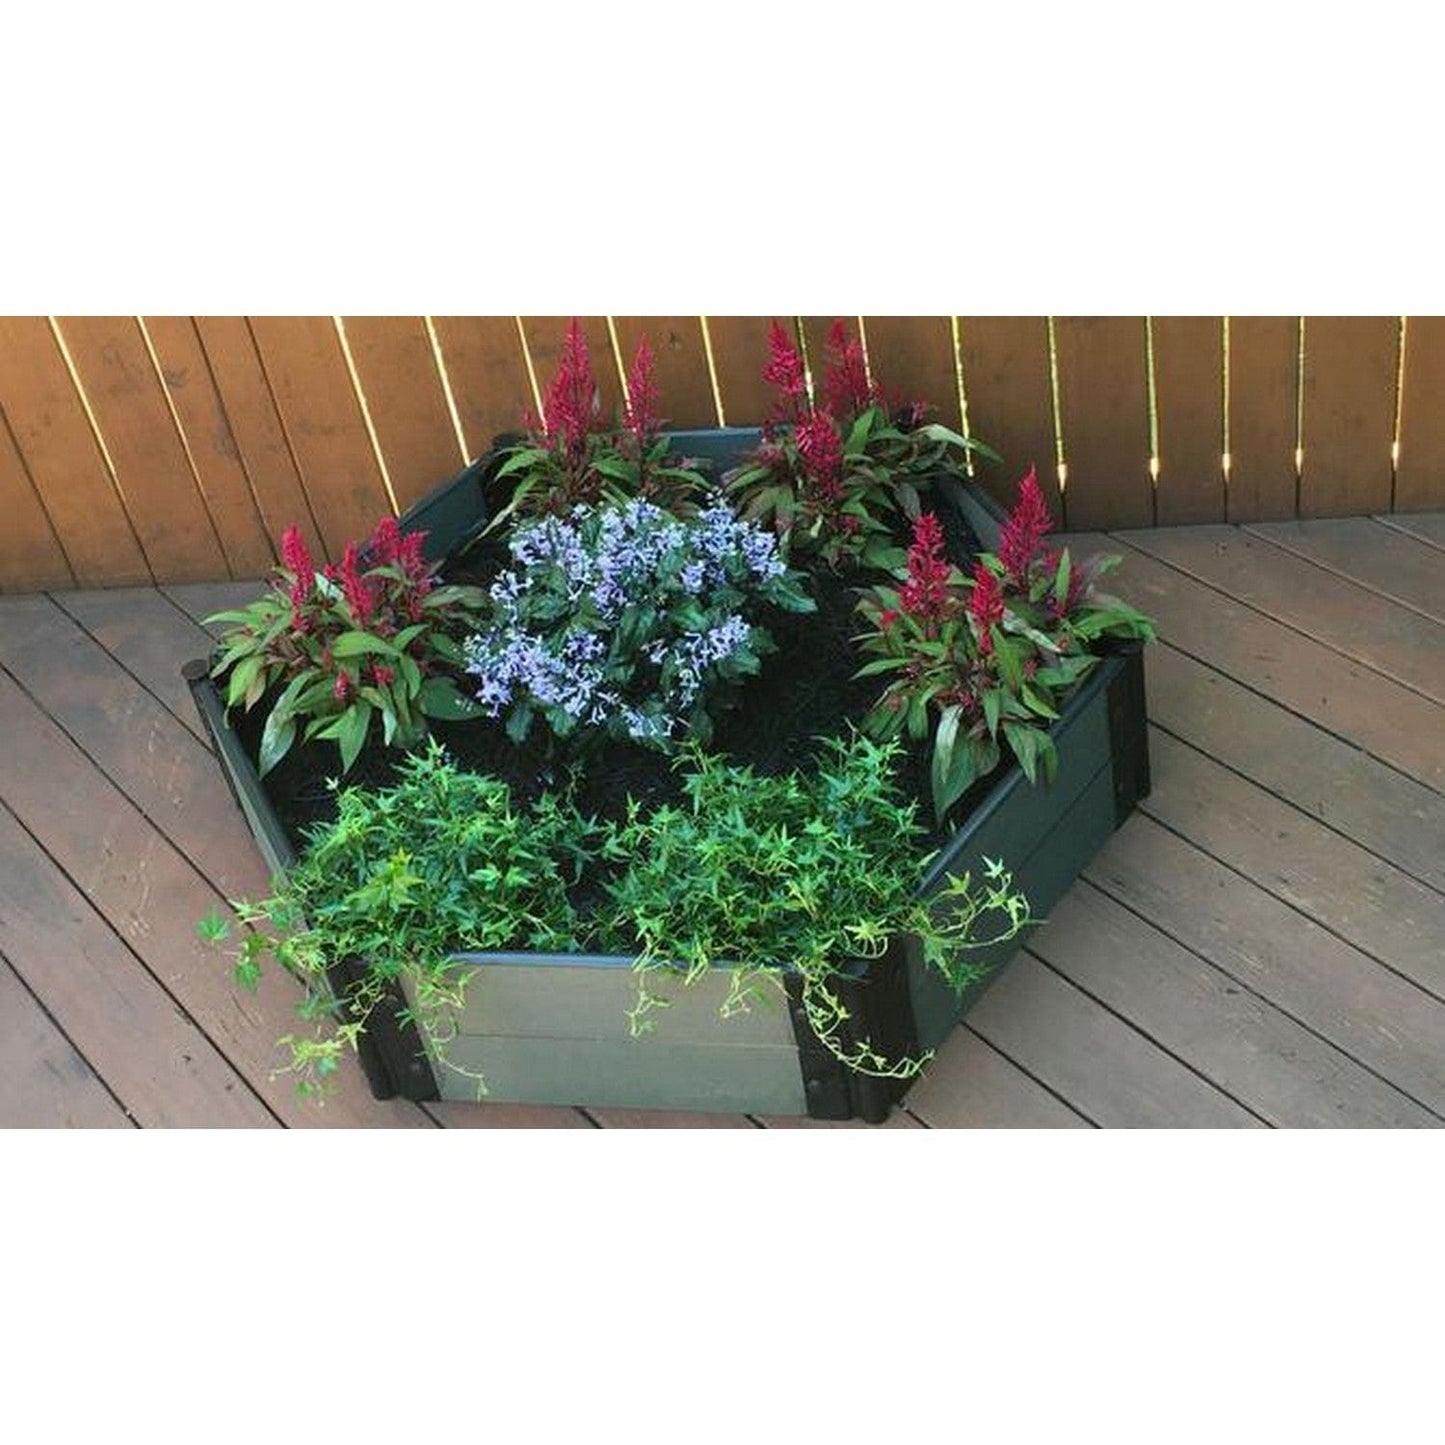 Frame It All Gardening Accessories Frame It All | Tool-Free Fort Jefferson Raised Garden Bed (Hexagon) 4' X 4' X 16.5" - Classic Sienna